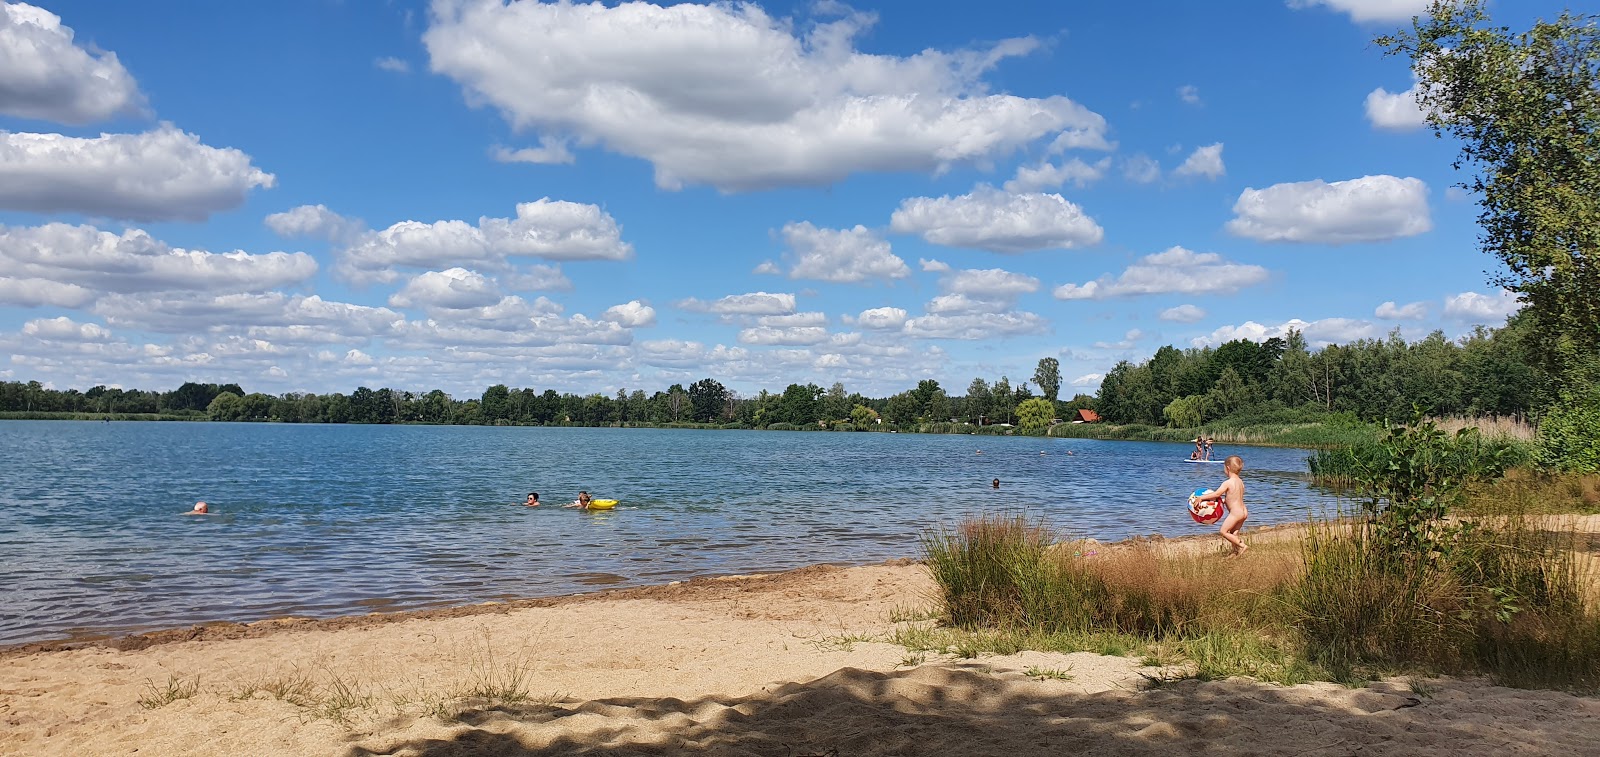 Photo of Strandbad Am Olbasee - popular place among relax connoisseurs